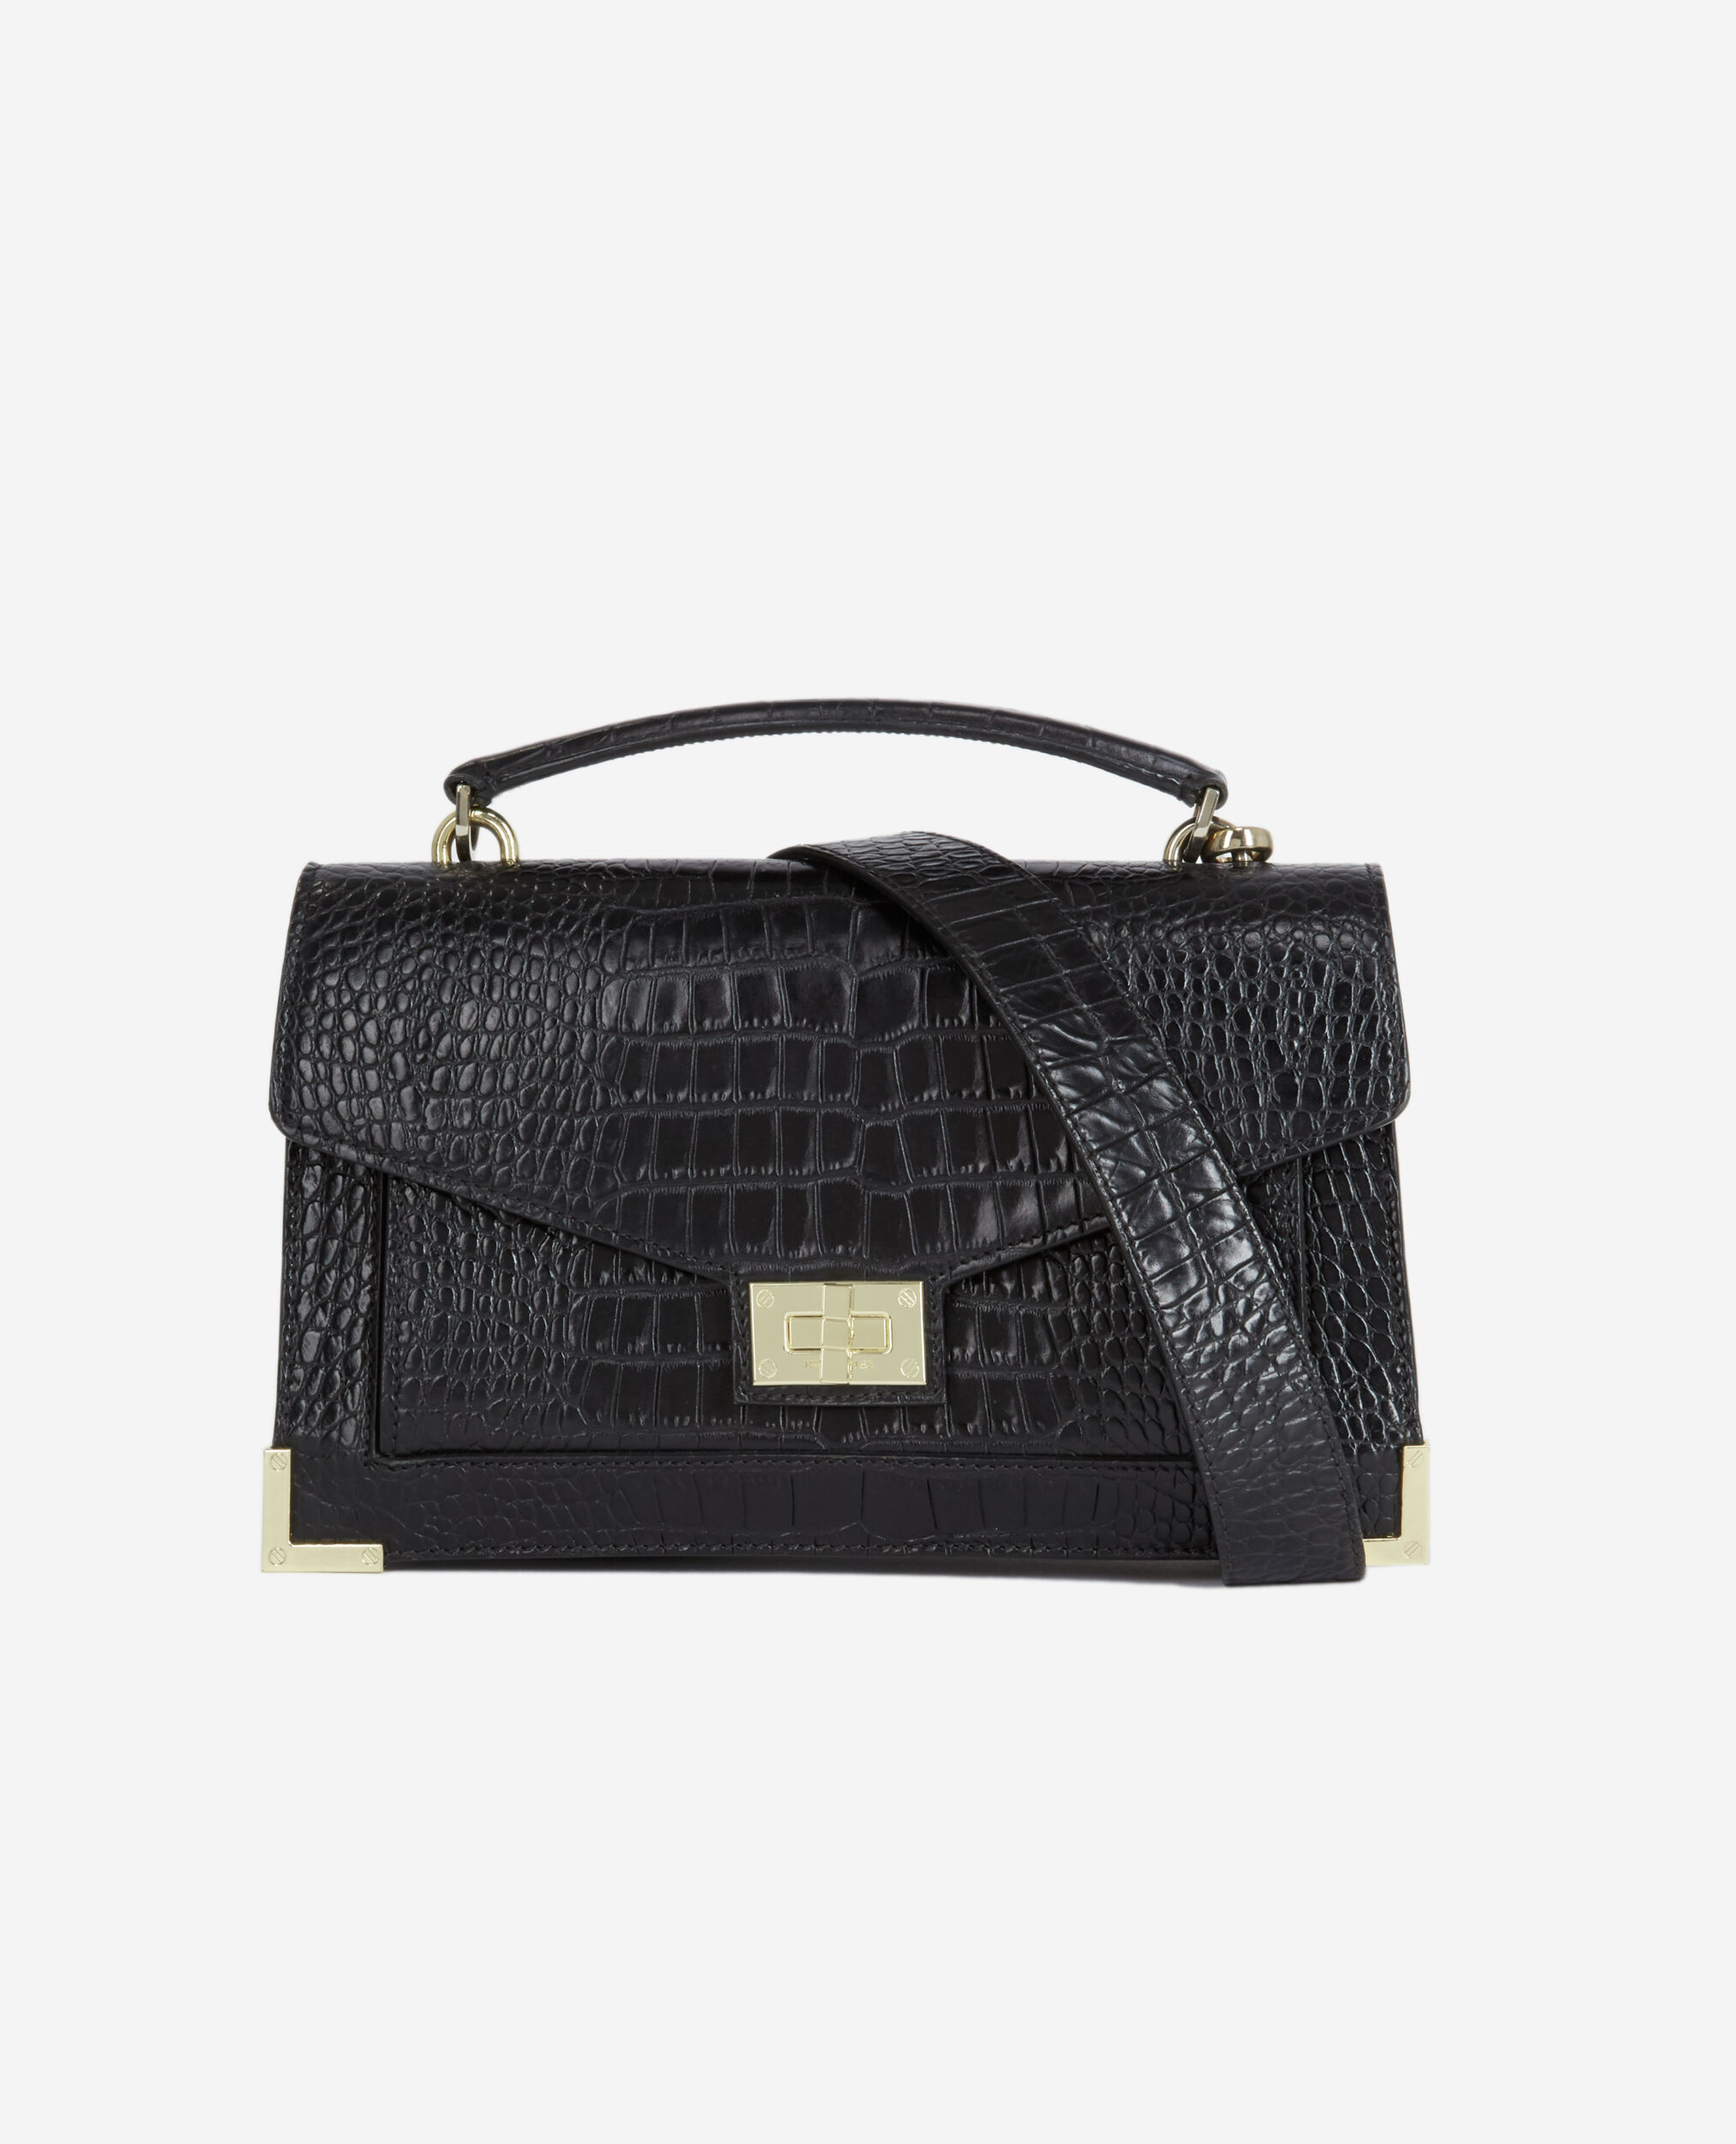 See all : Bags Collection | The Kooples